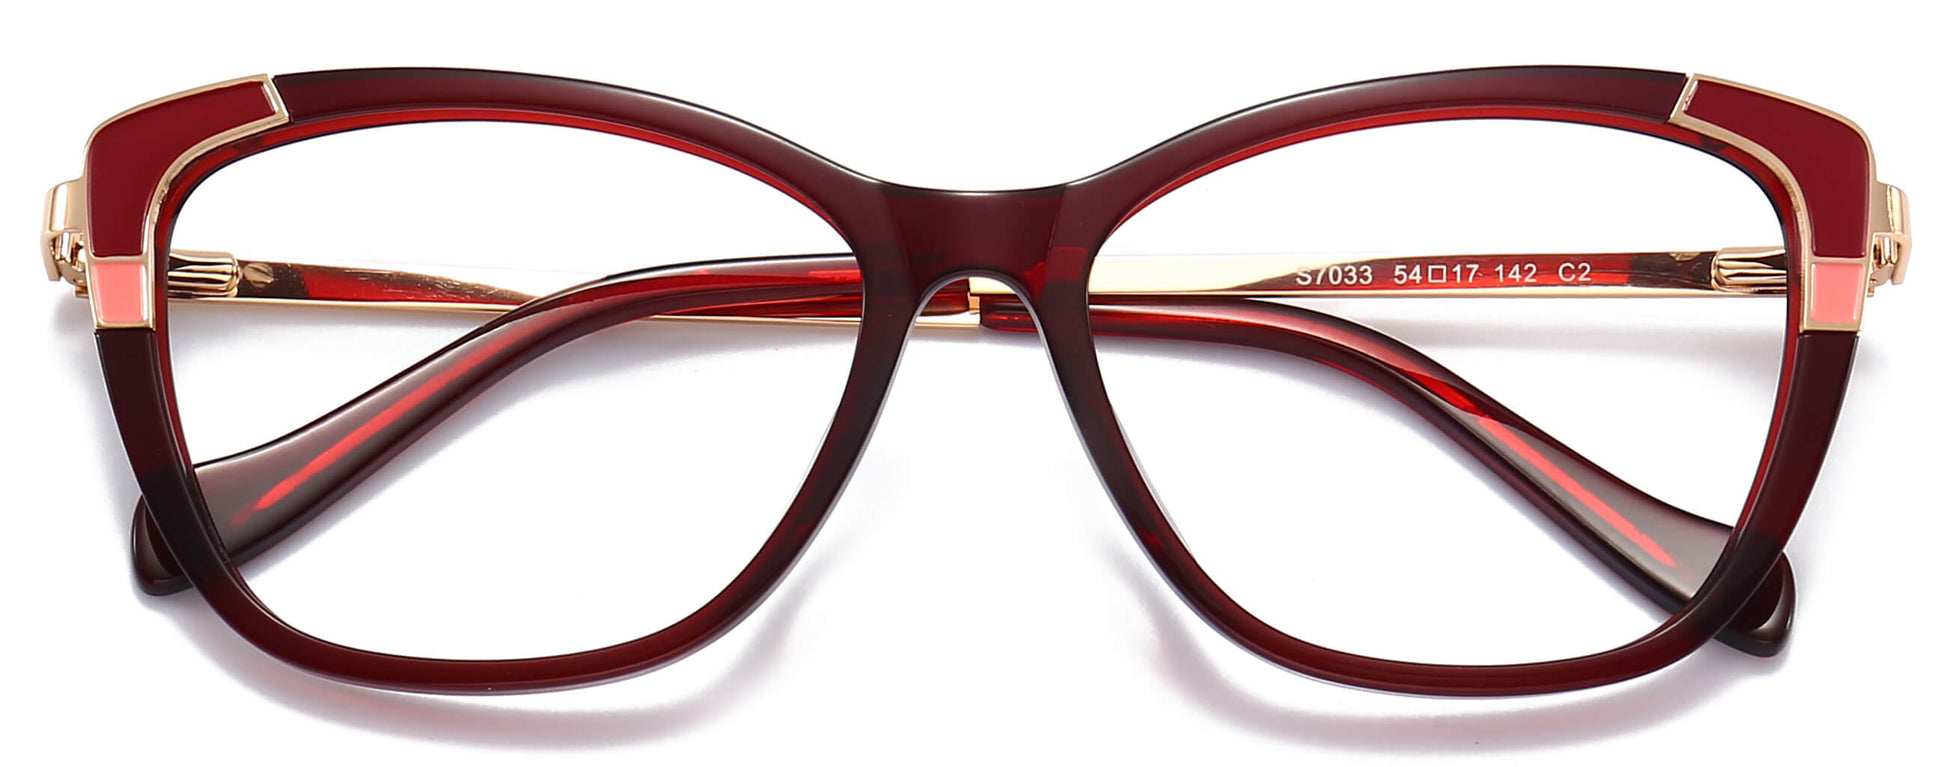 Dulce Cateye Red Eyeglasses from ANRRI, closed view